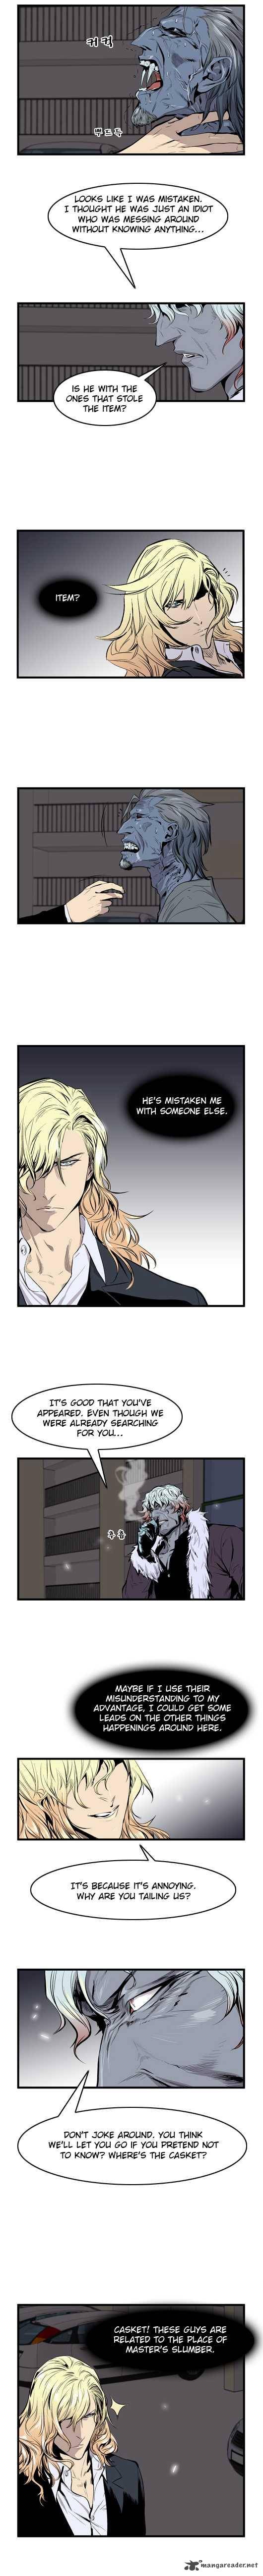 Noblesse 44 3